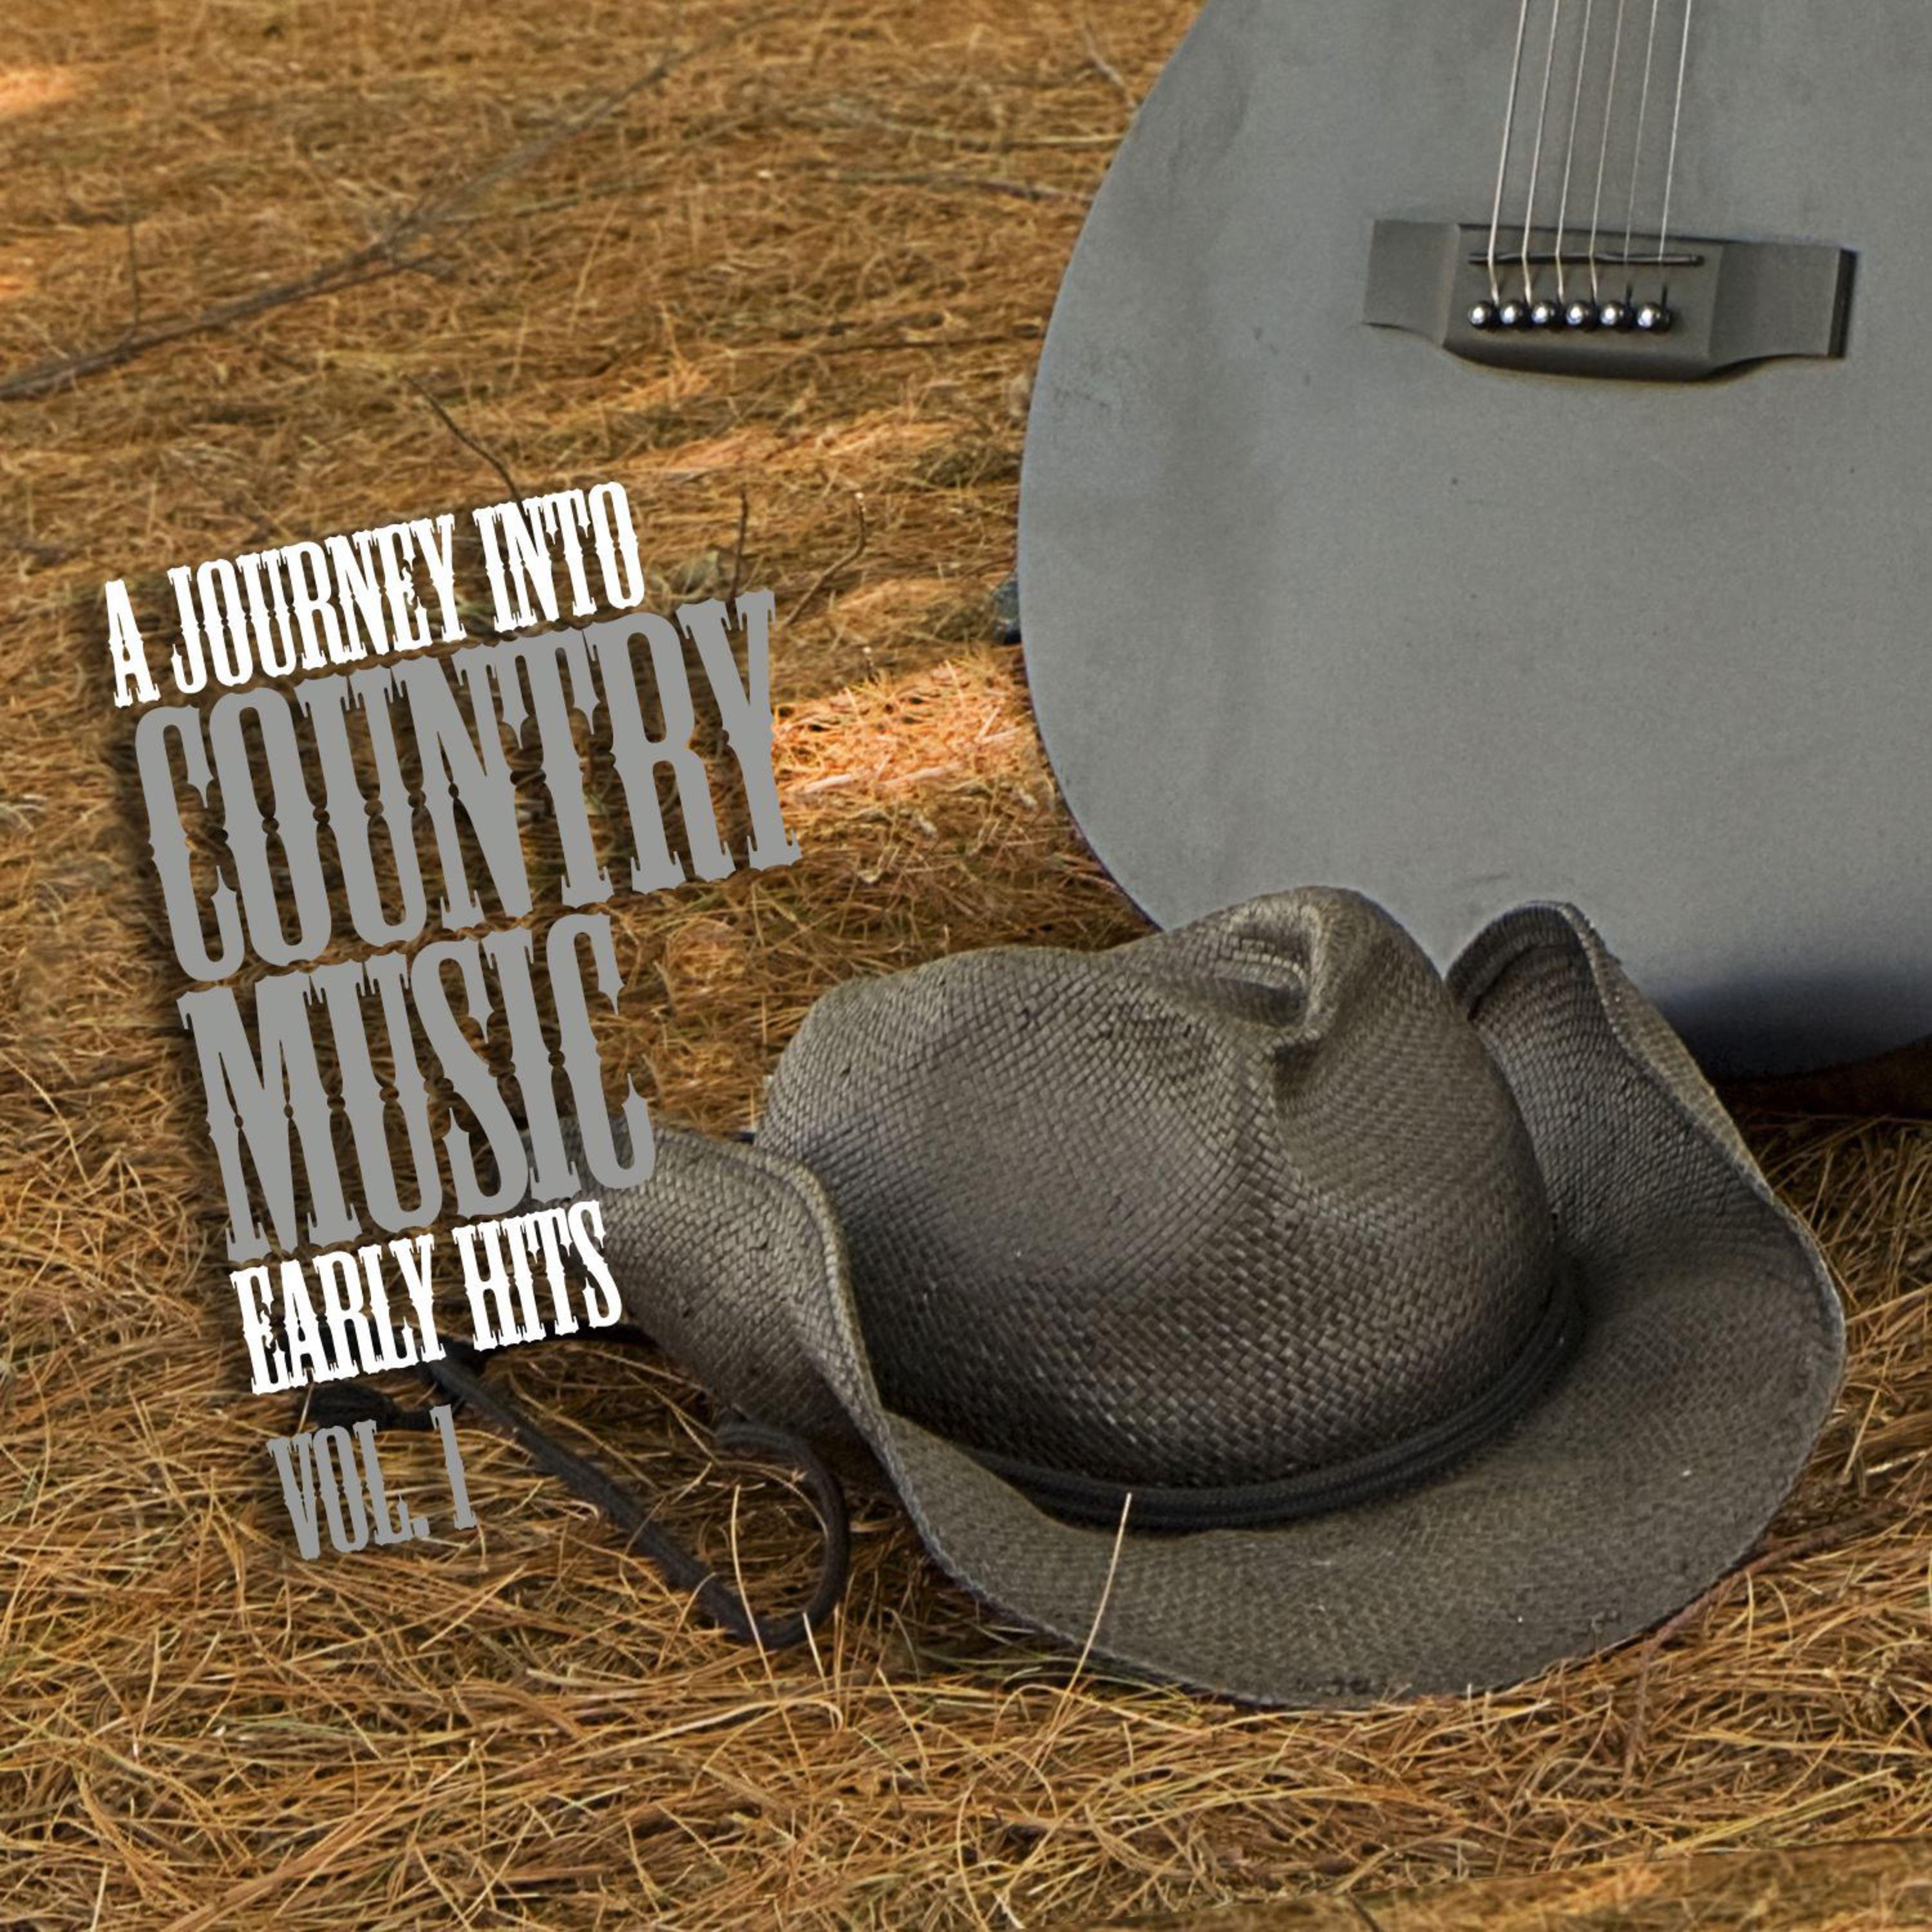 A Journey into Country Music Early Hits (Vol. 1)